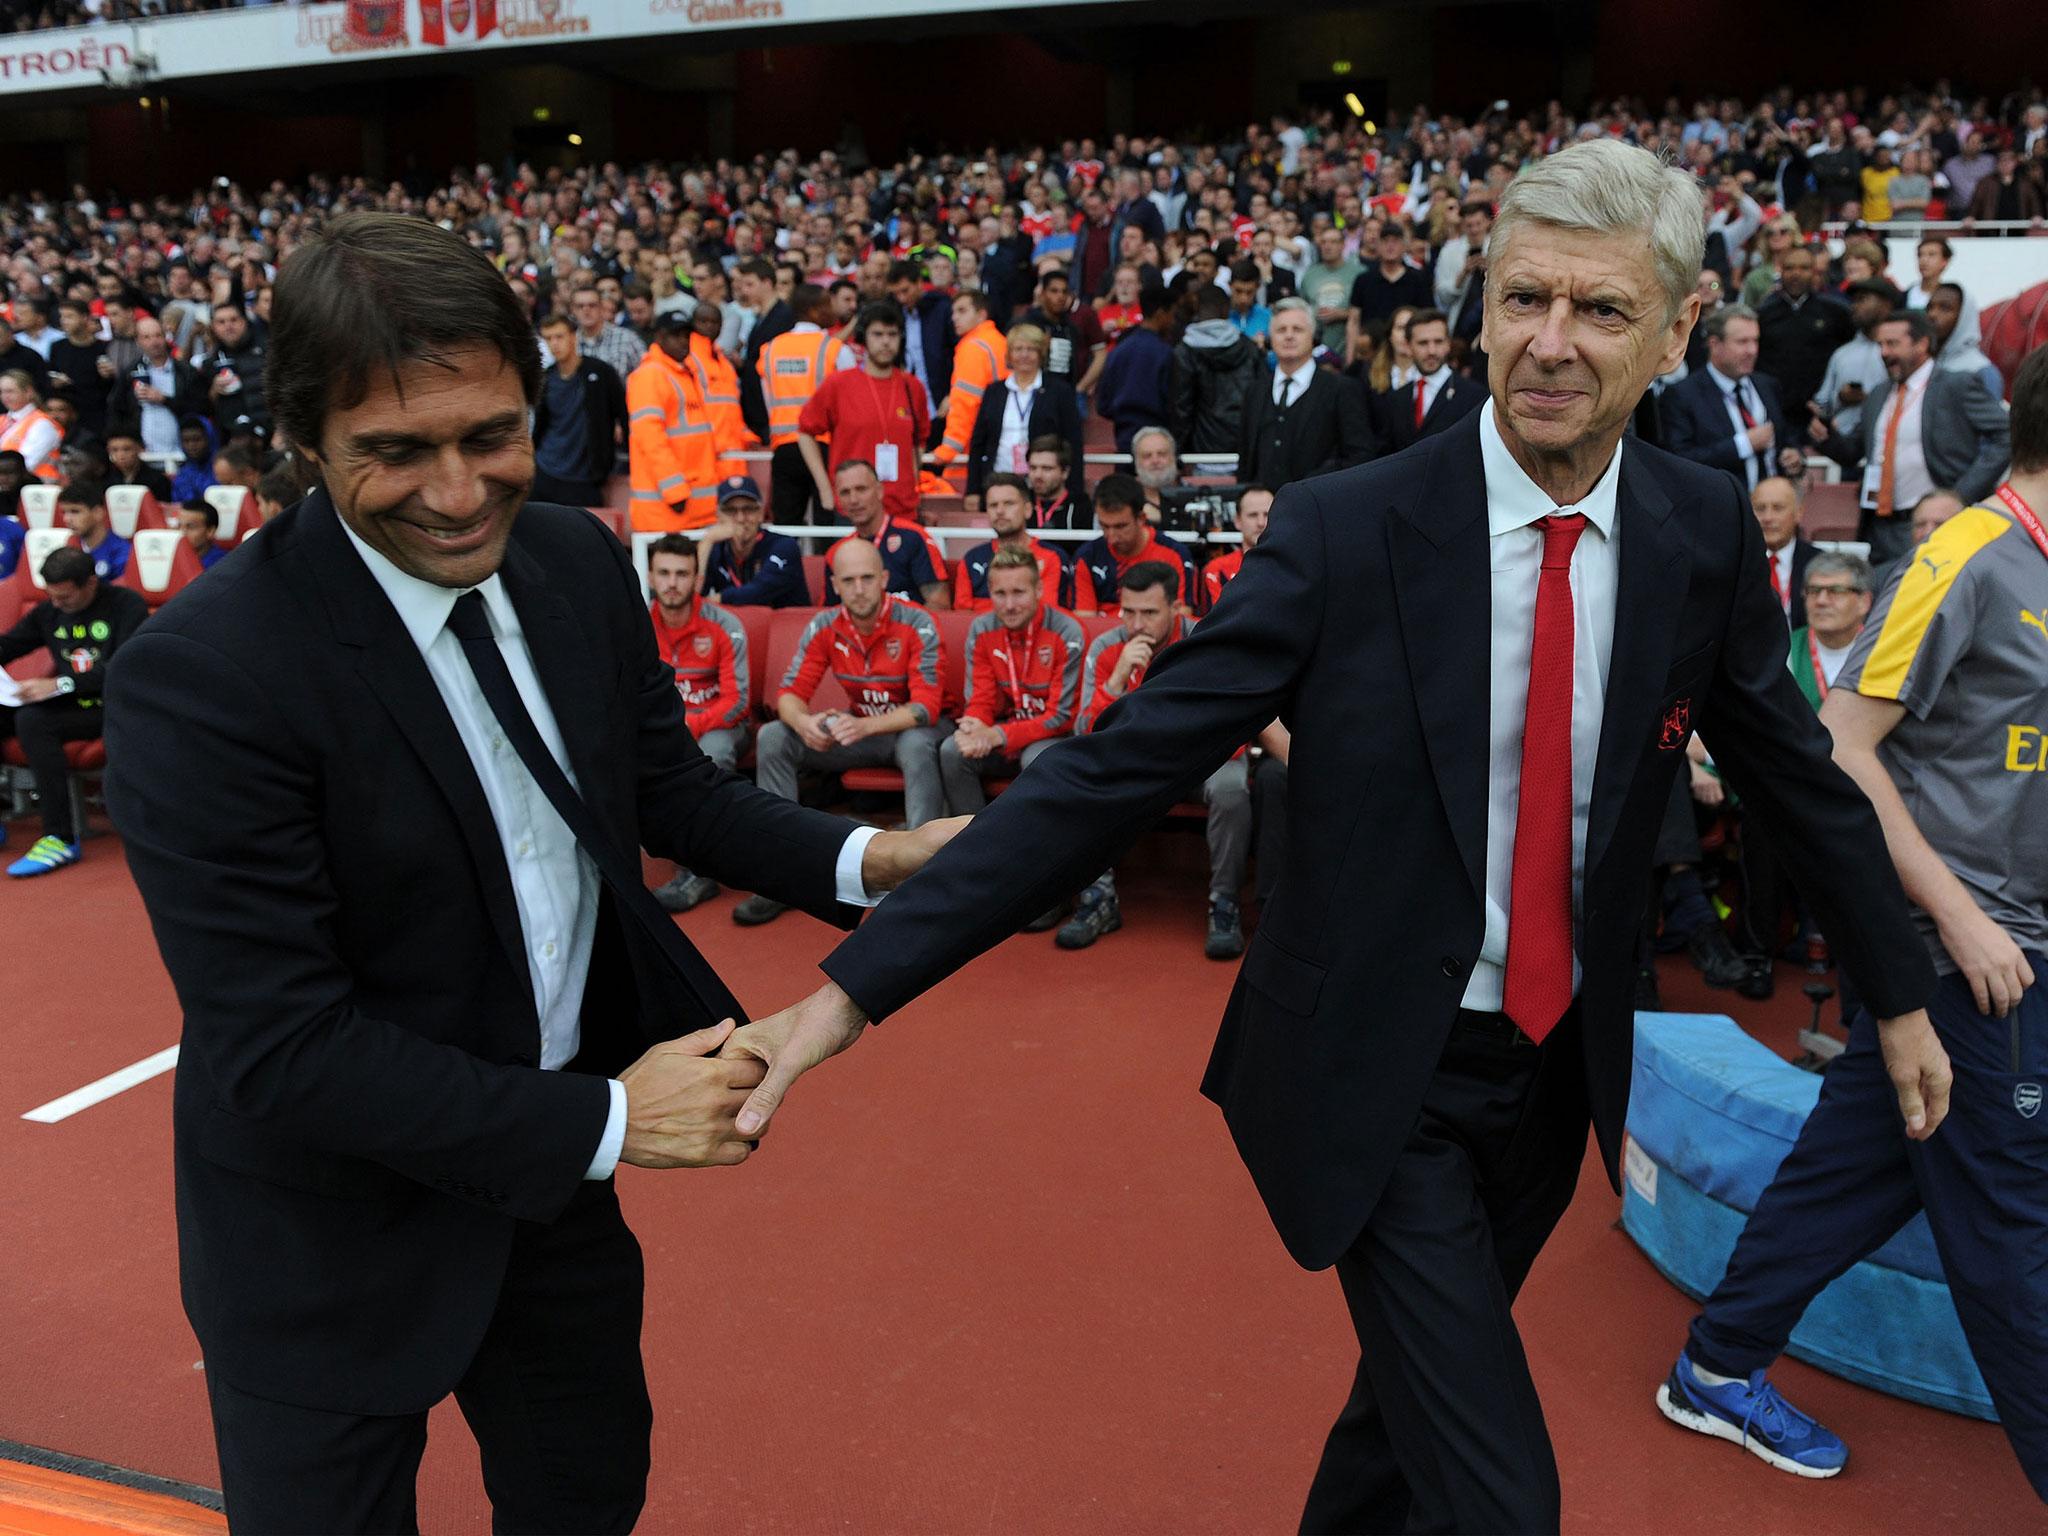 Antonio Conte praised Arsene Wenger and said he has his 'respect' for his work at Arsenal